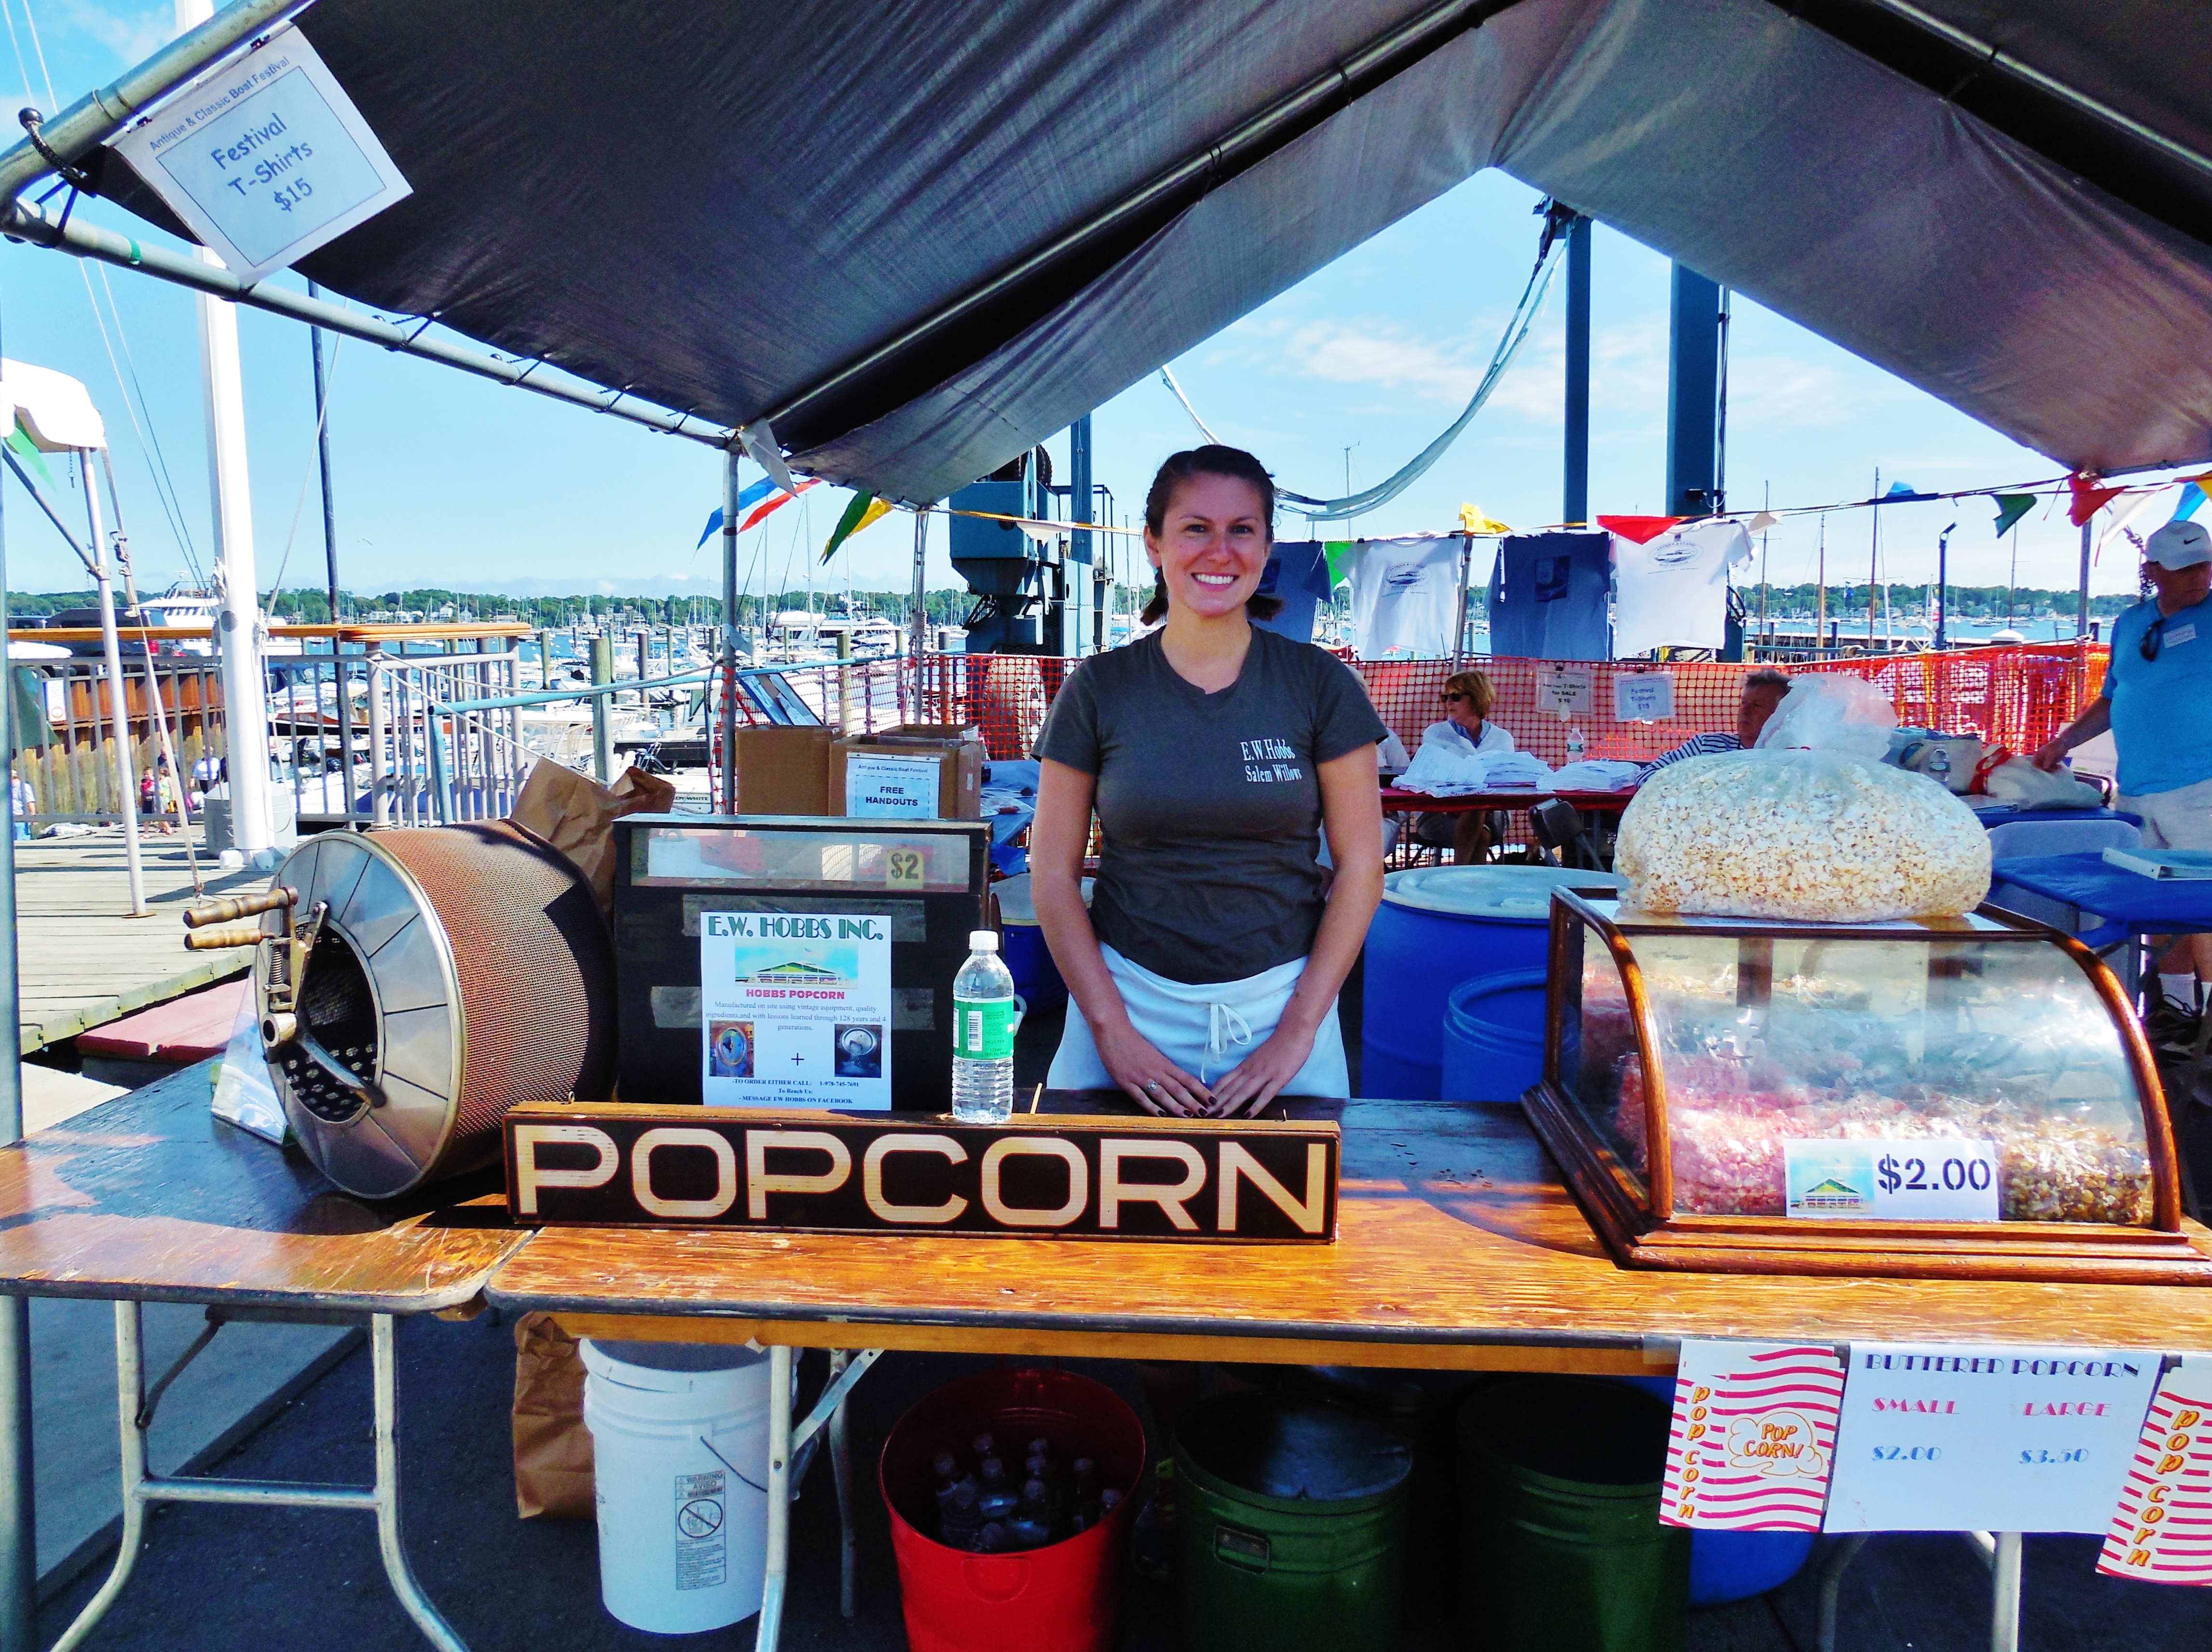 Popcorn Lady from the Willows